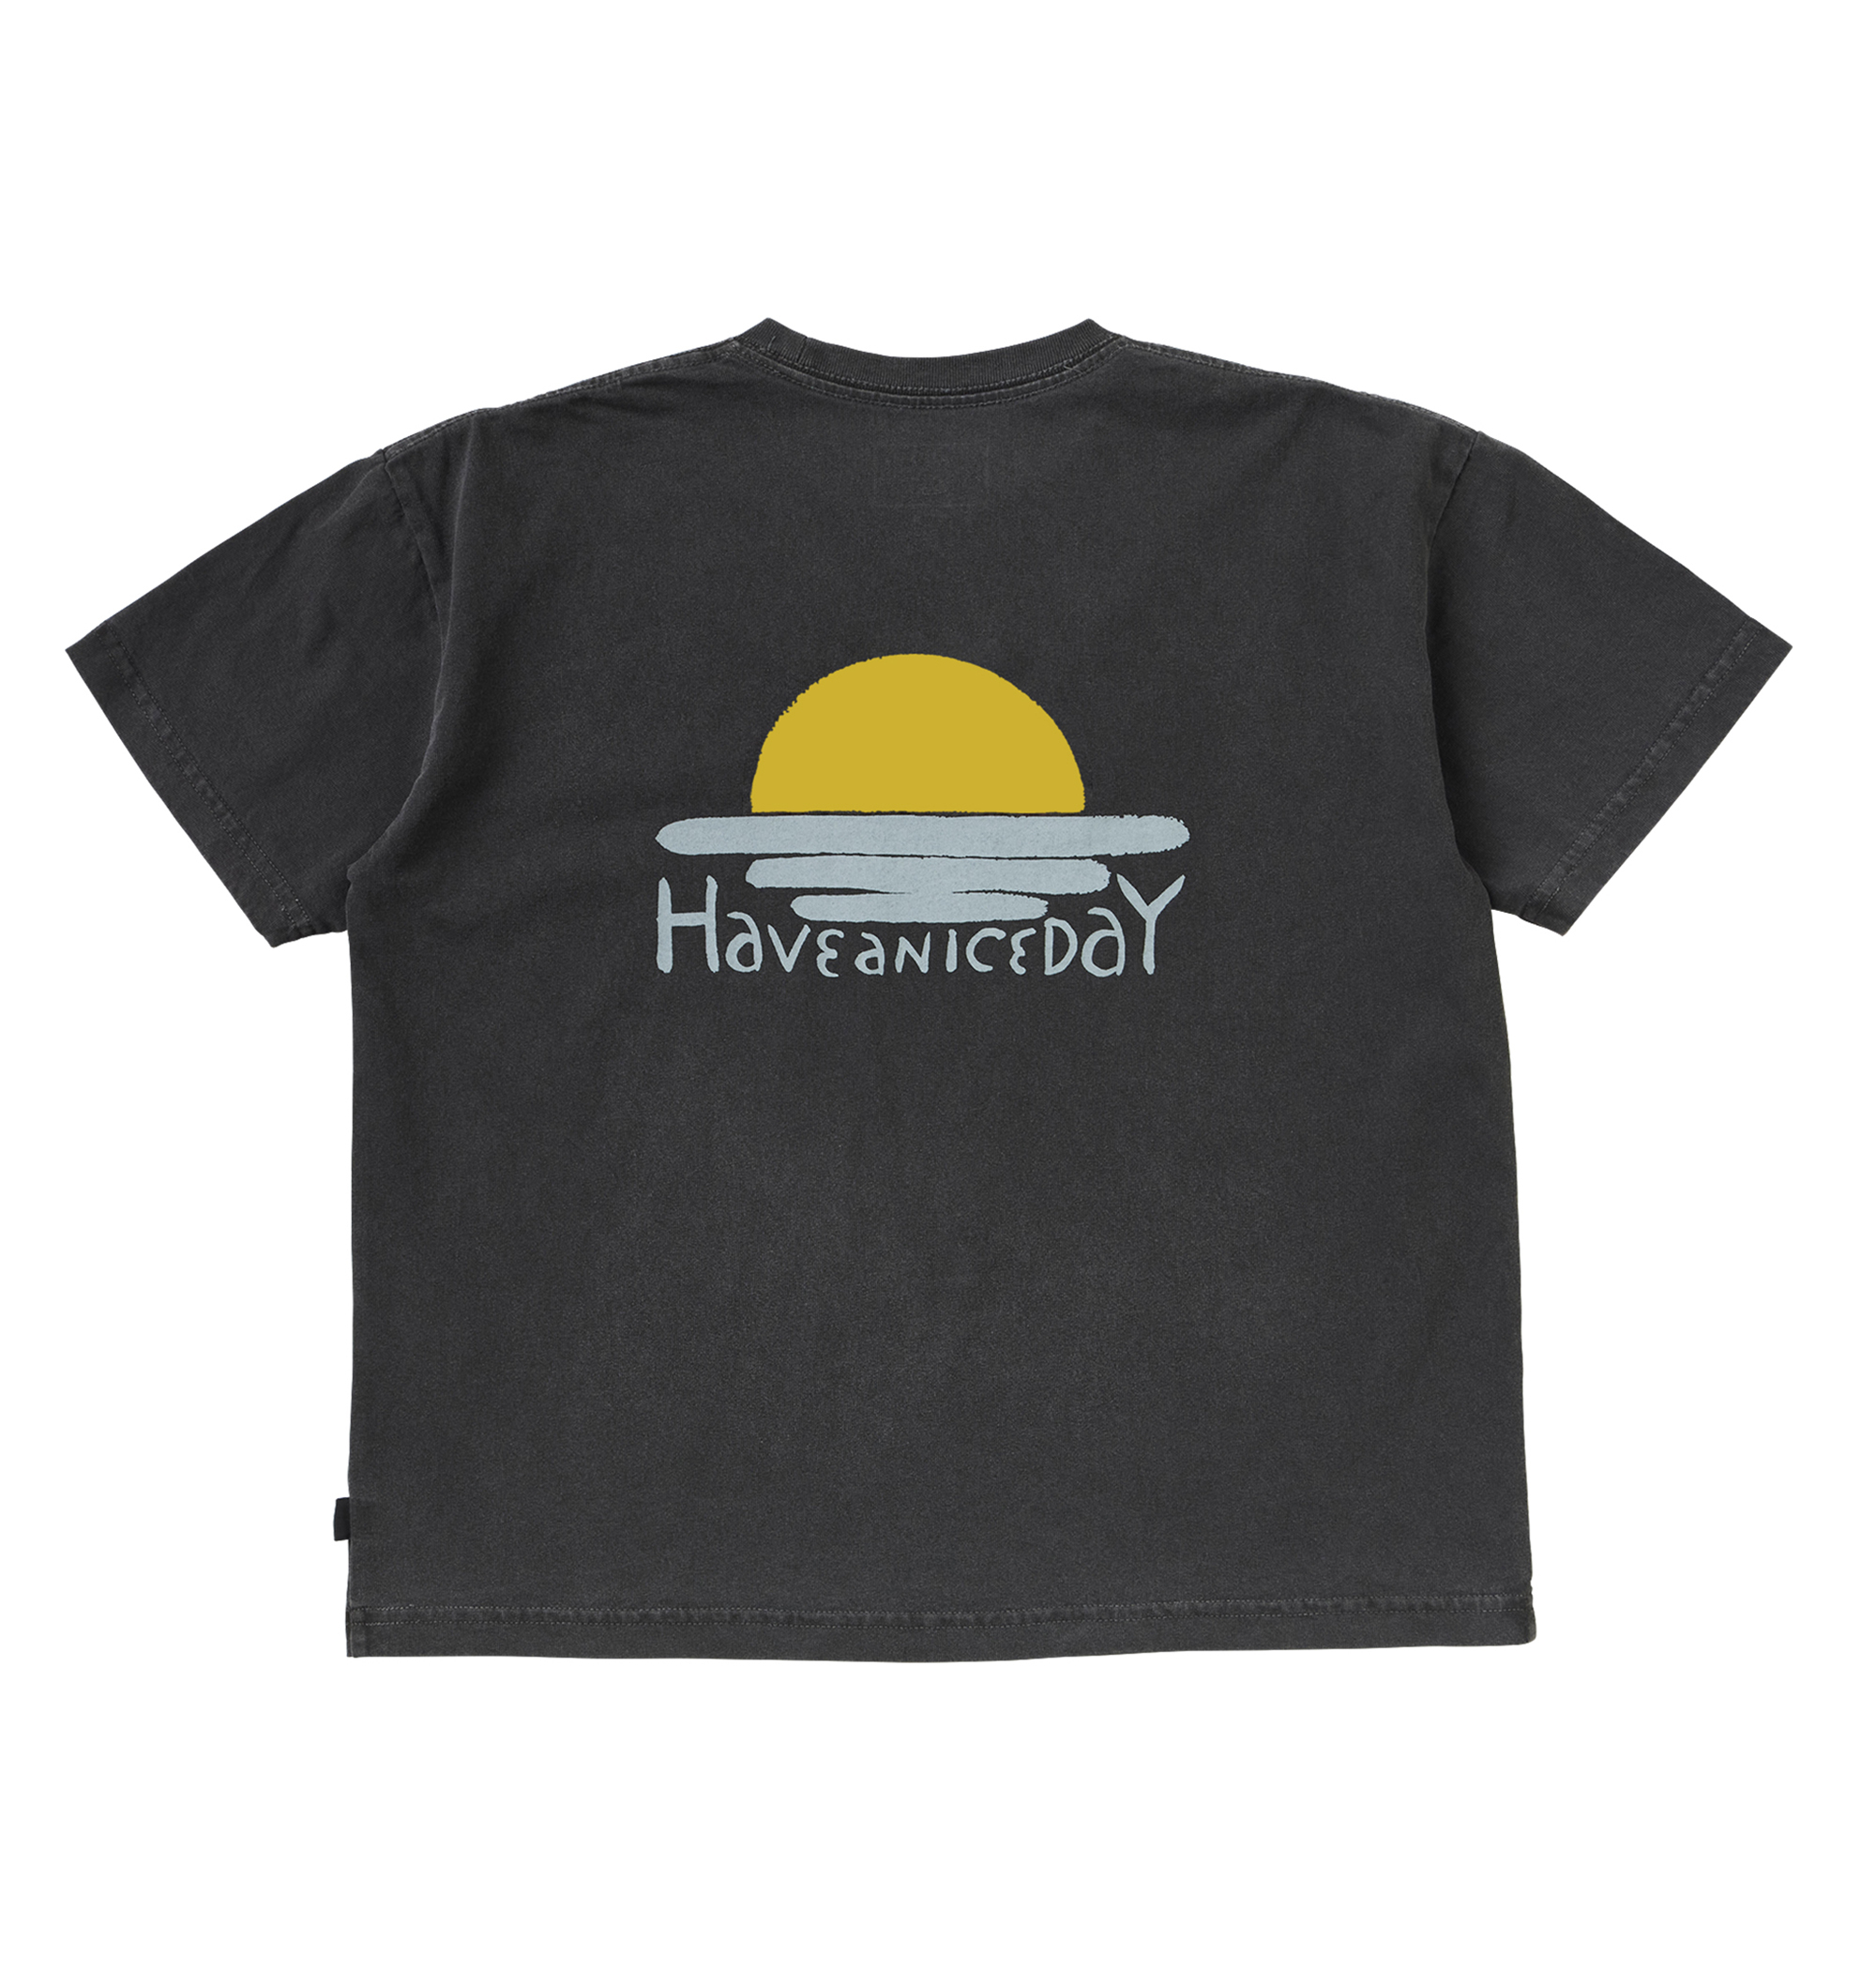 30%OFF セール SALE Quiksilver クイックシルバー HAVE A NICE DAY ST YOUTH キッズ Tシャツ Tシャツ ティーシャツ